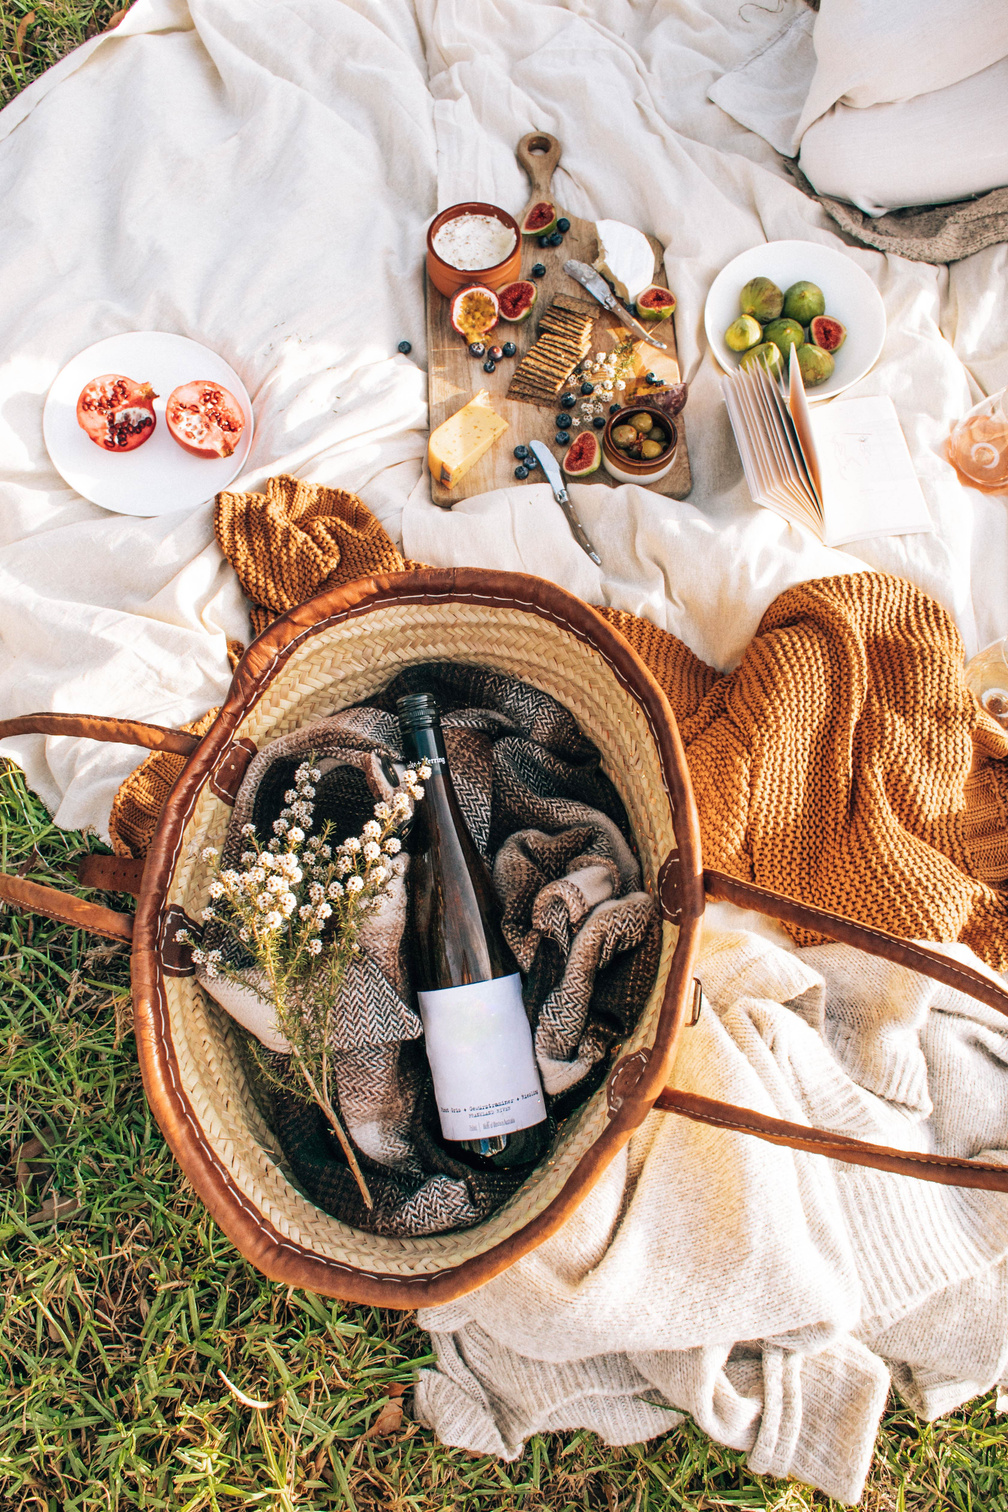 Snacks and Wine in a Picnic